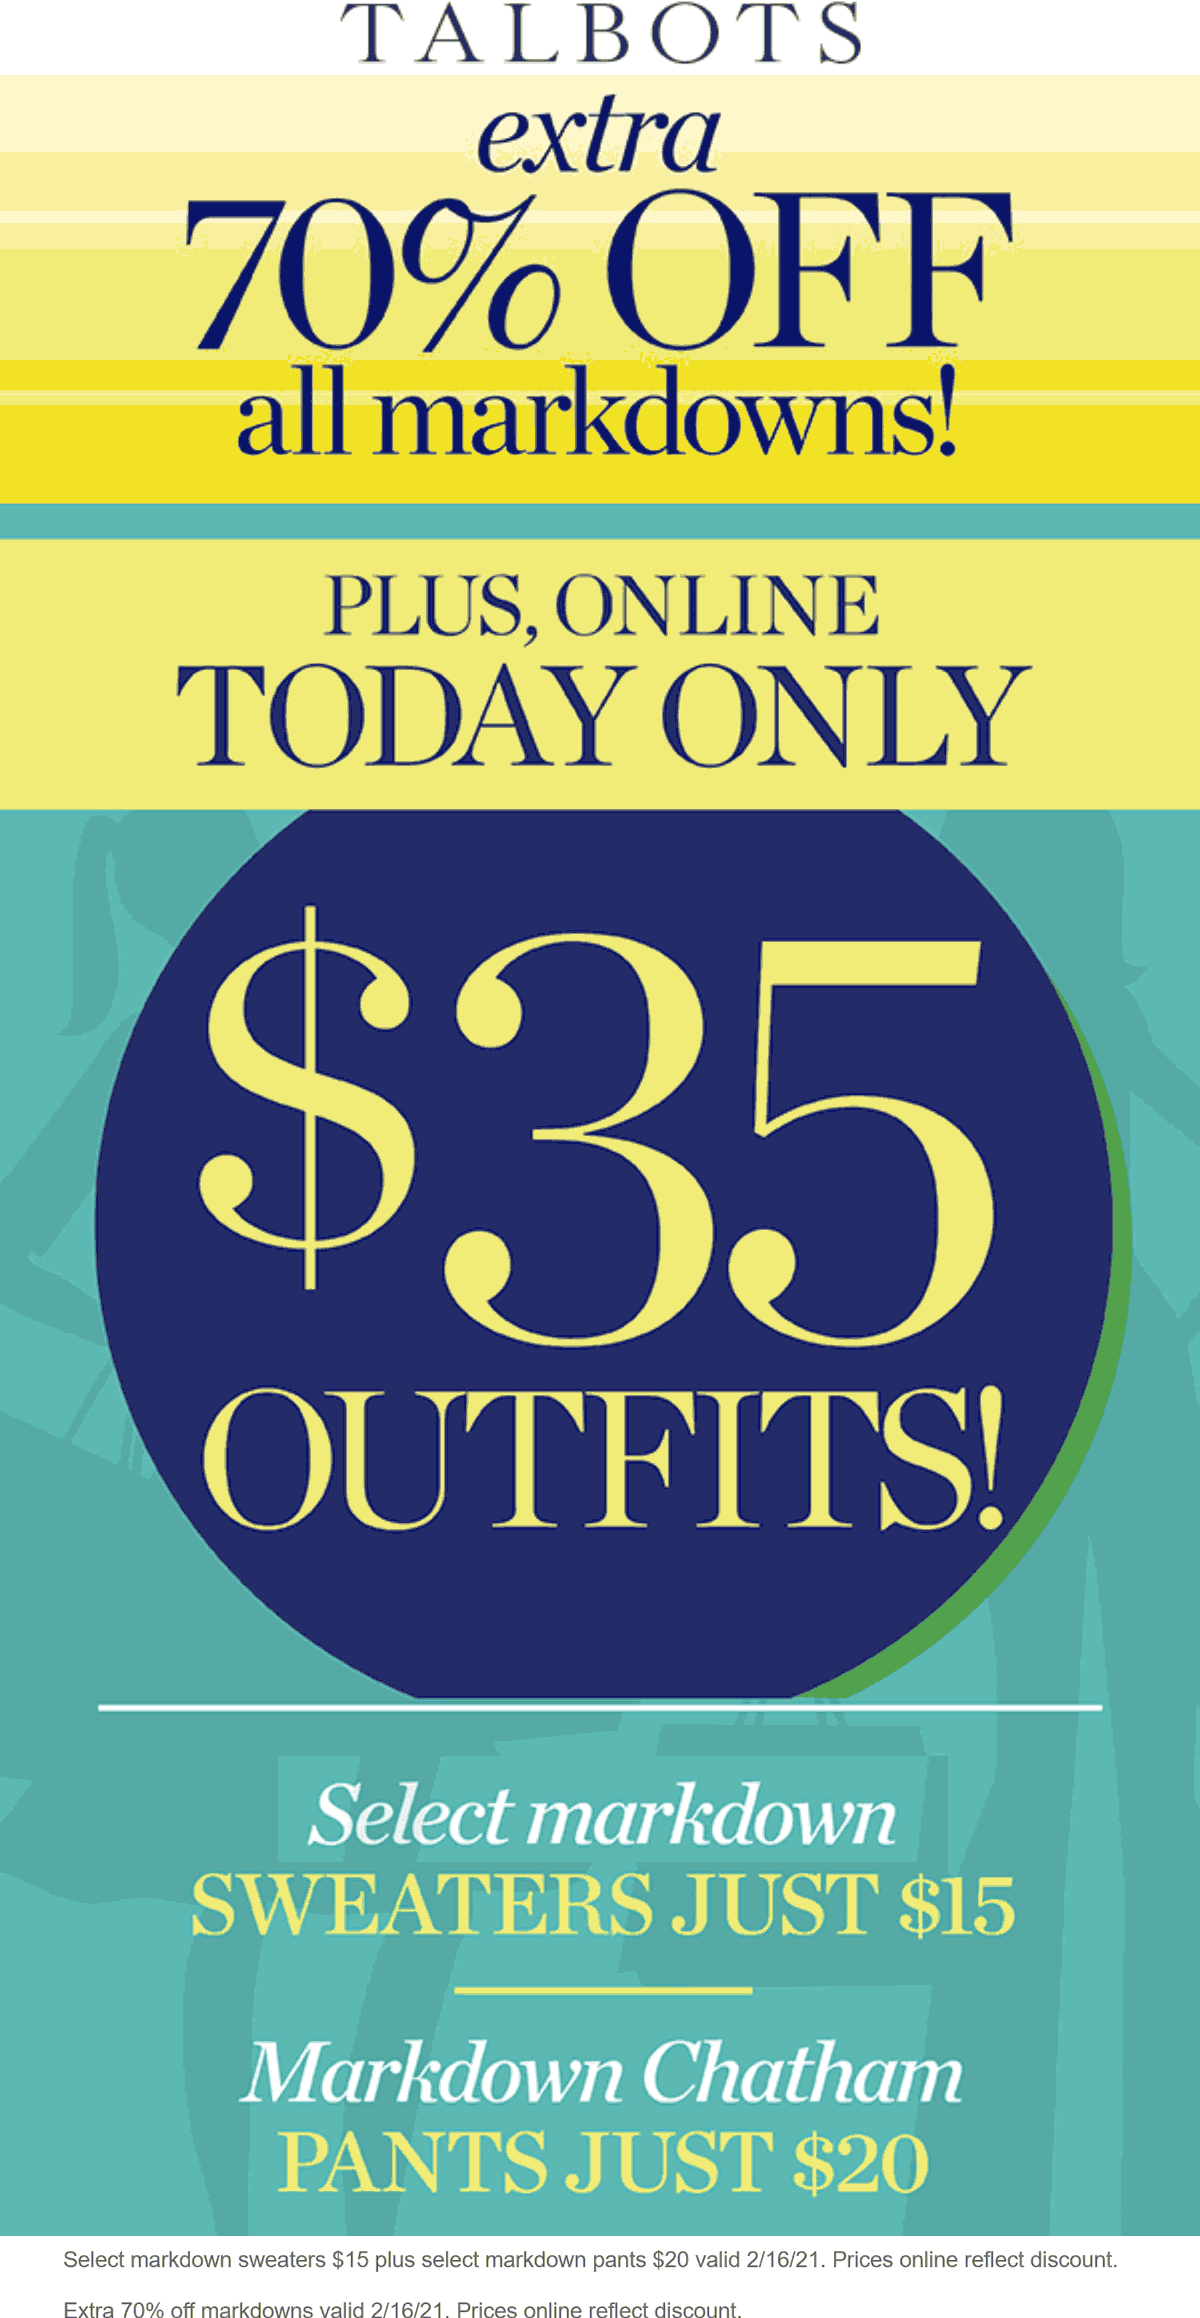 [September, 2021] Extra 70 off markdowns today at Talbots, ditto